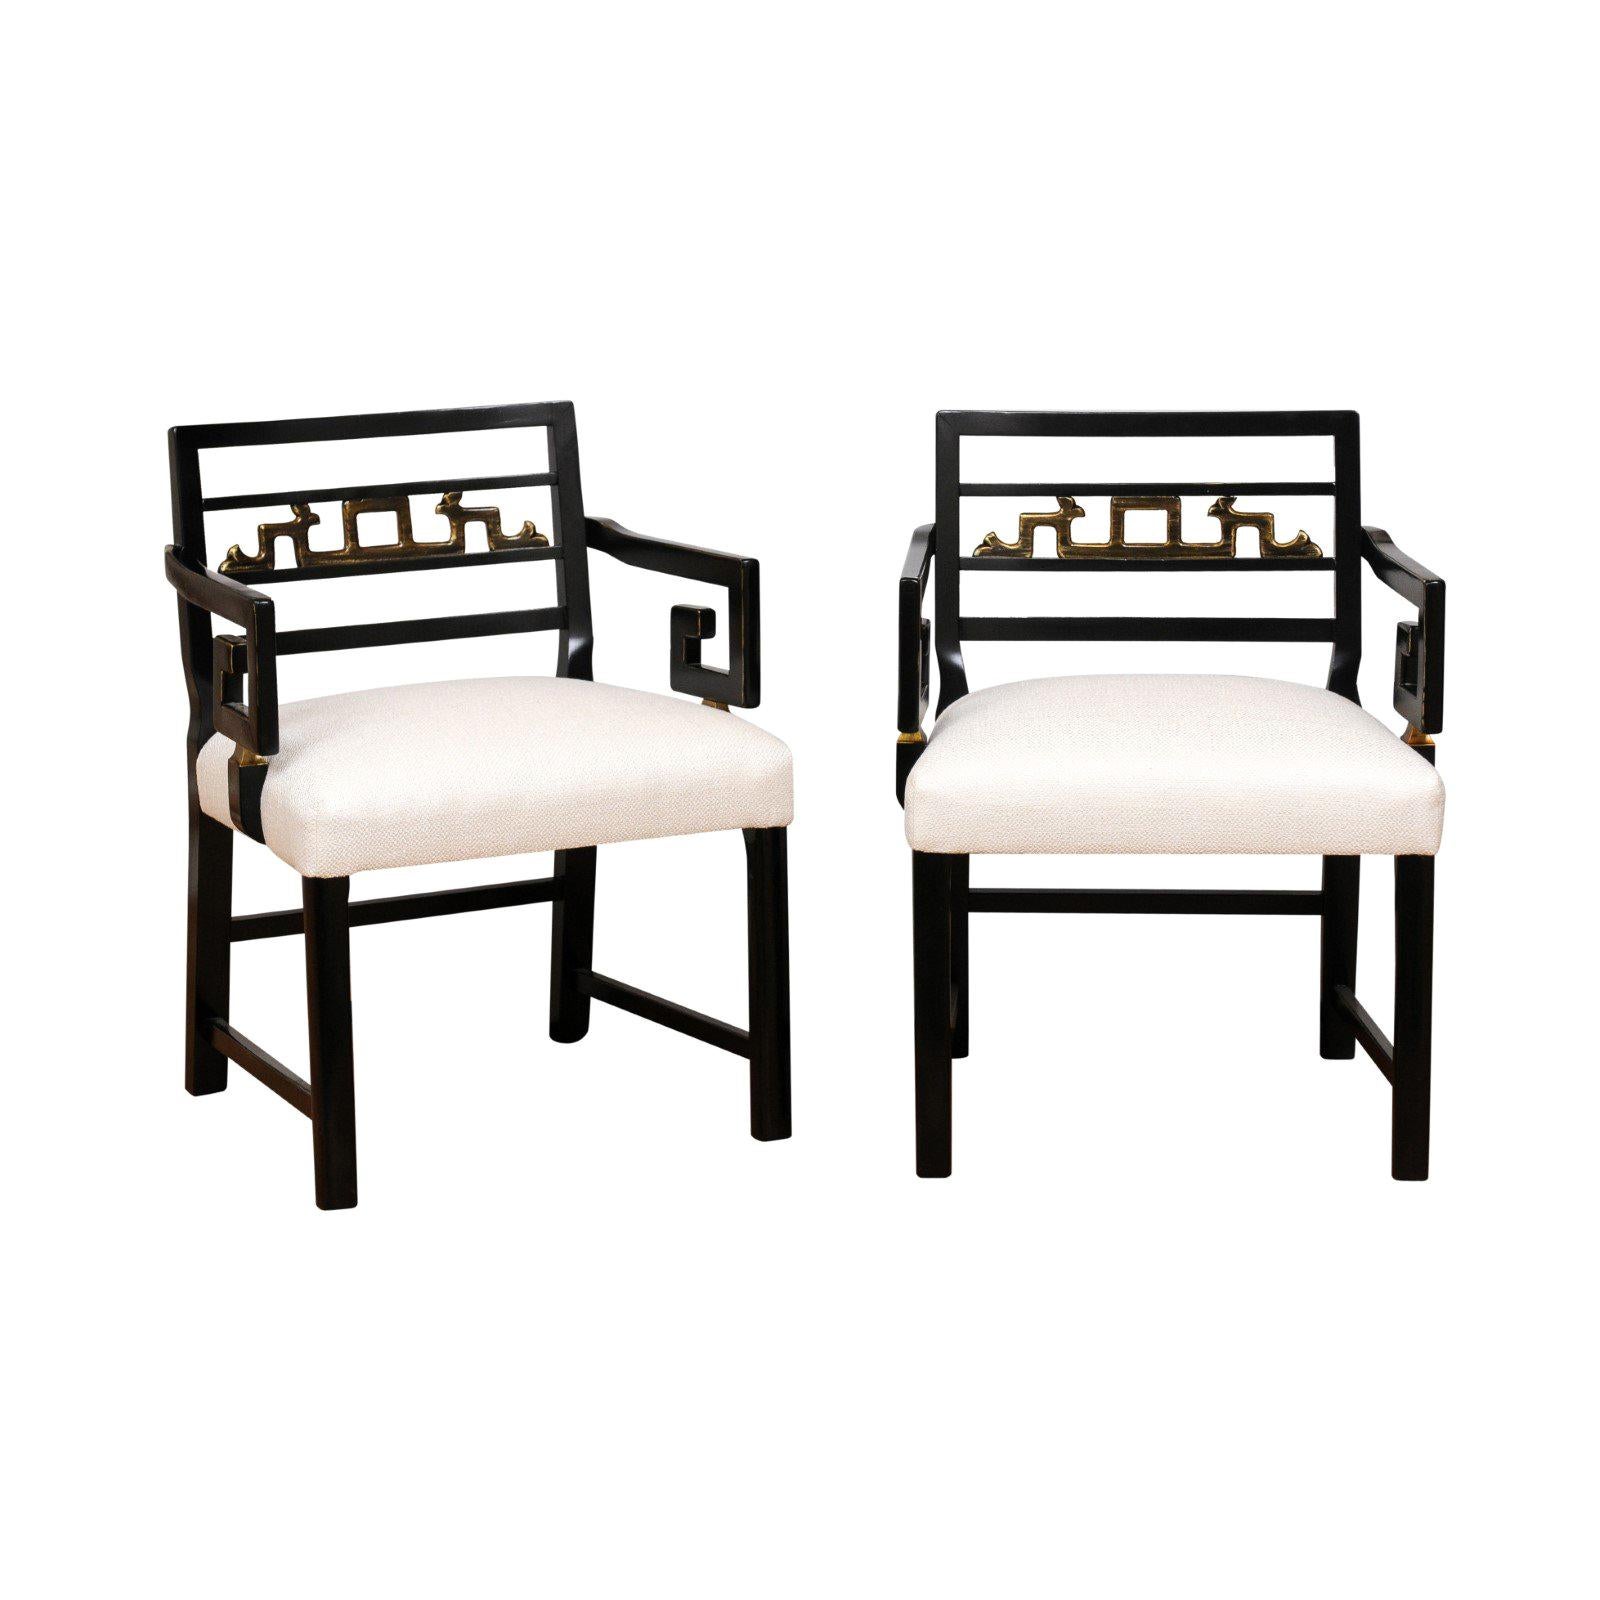 Exquisite Pair of Modern Chinoiserie Greek Key Armchairs by Baker, circa 1960 For Sale